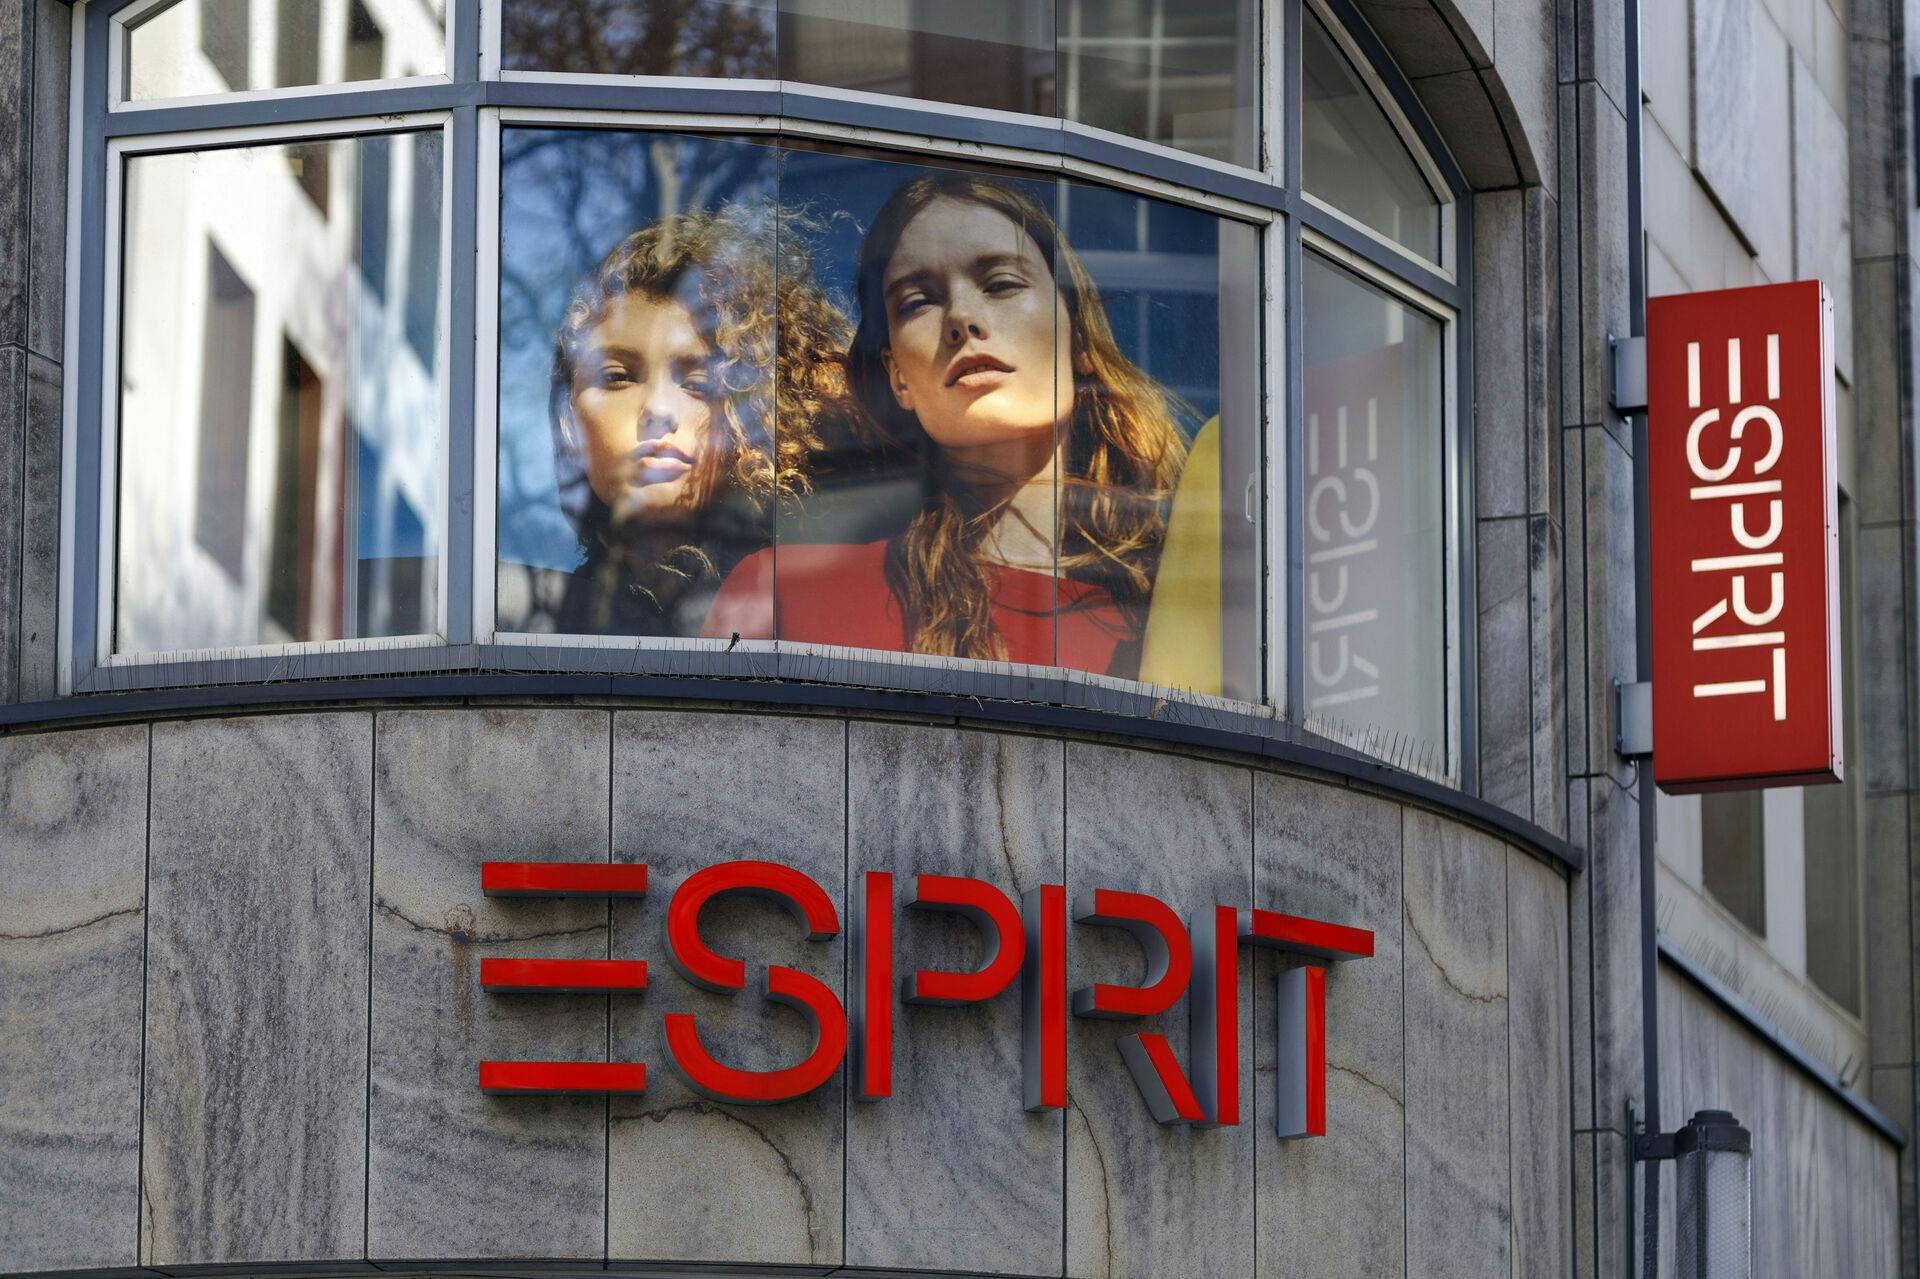 A branch of the Esprit fashion group, which wants to use the protective shield procedure because of the corona crisis. Koln, April 7th, 2020 | usage worldwide Photo by: Christoph Hardt/Geisler-Fotopres/picture-alliance/dpa/AP Images